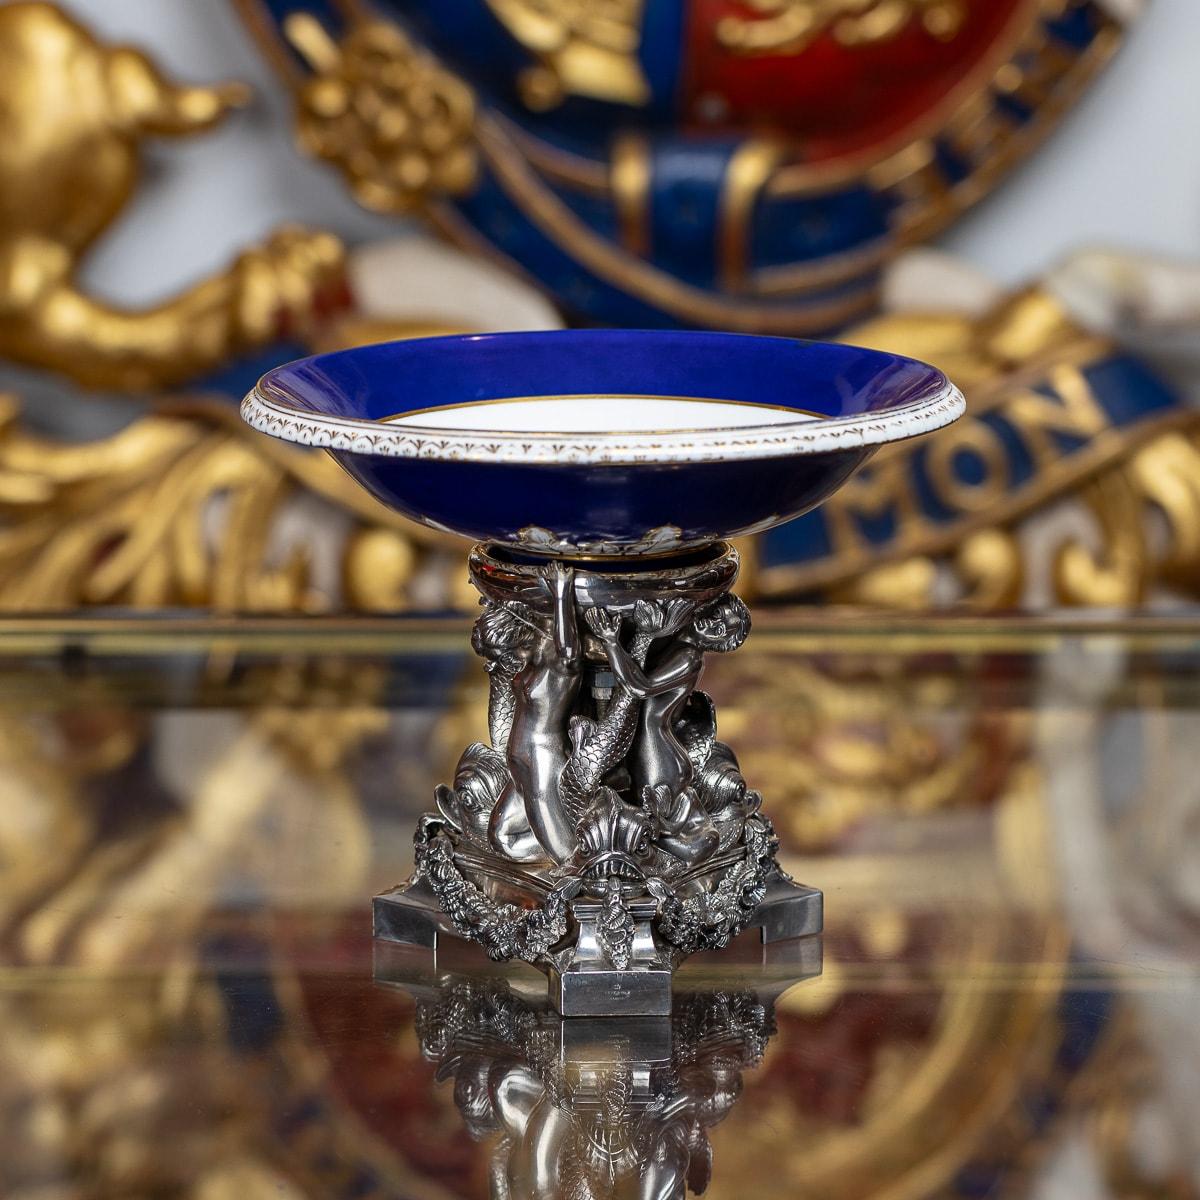 Antique mid-19th Century Victorian solid silver figural centerpiece, raised on trefoil shaped base, the base is applied with cast swags decorated with oceanic crustaceans, supporting three finely modelled mermaid figures and dolphins, suspending a